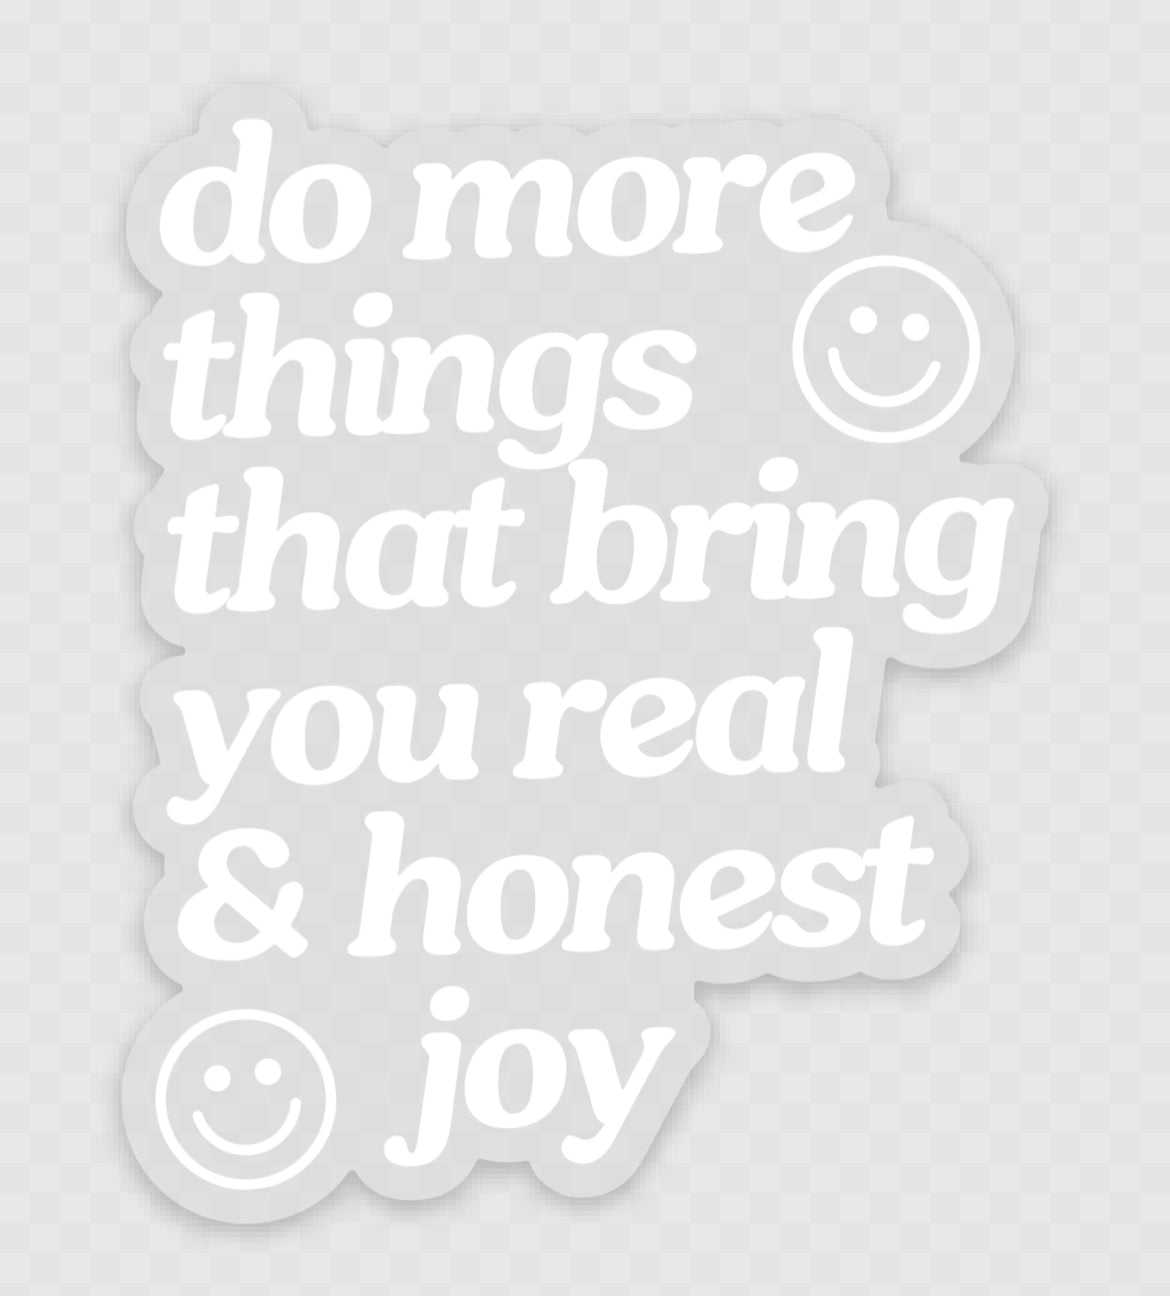 "Do More Things That Bring You Real & Honest Joy" Sticker